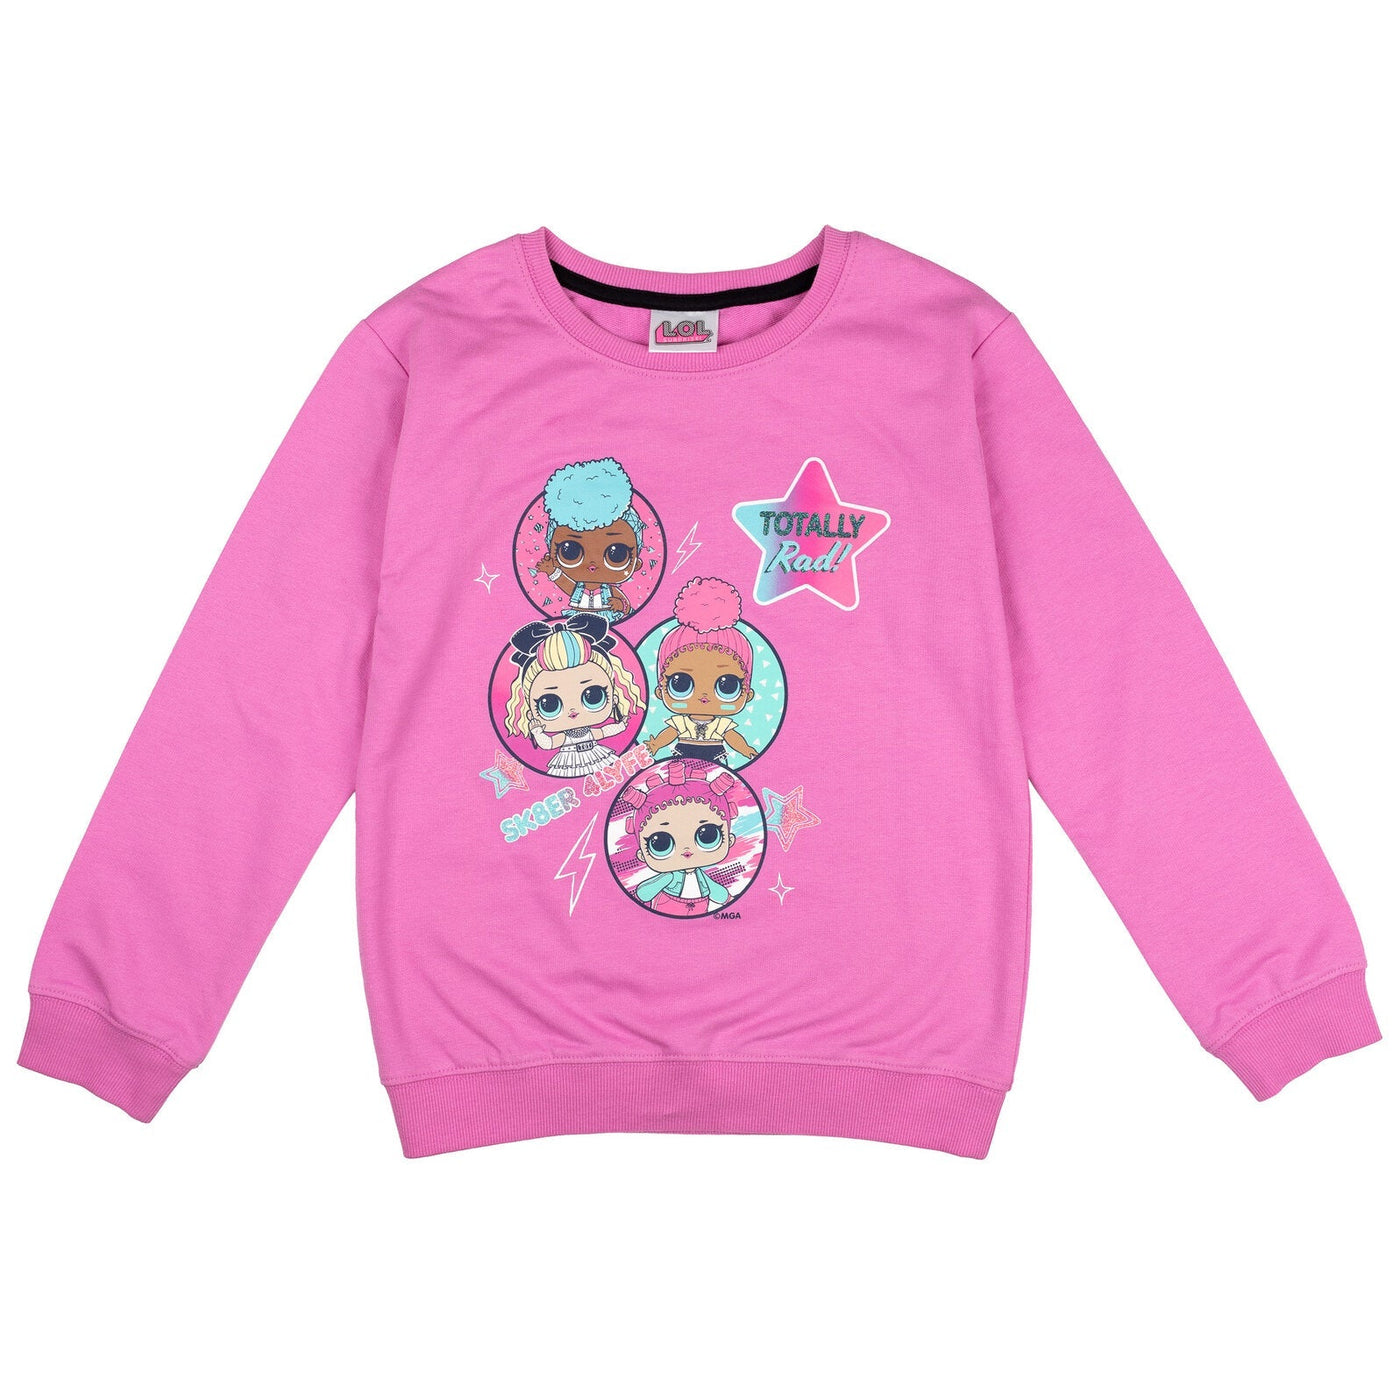 L.O.L. Surprise! French Terry Sweatshirt and Leggings Outfit Set - imagikids